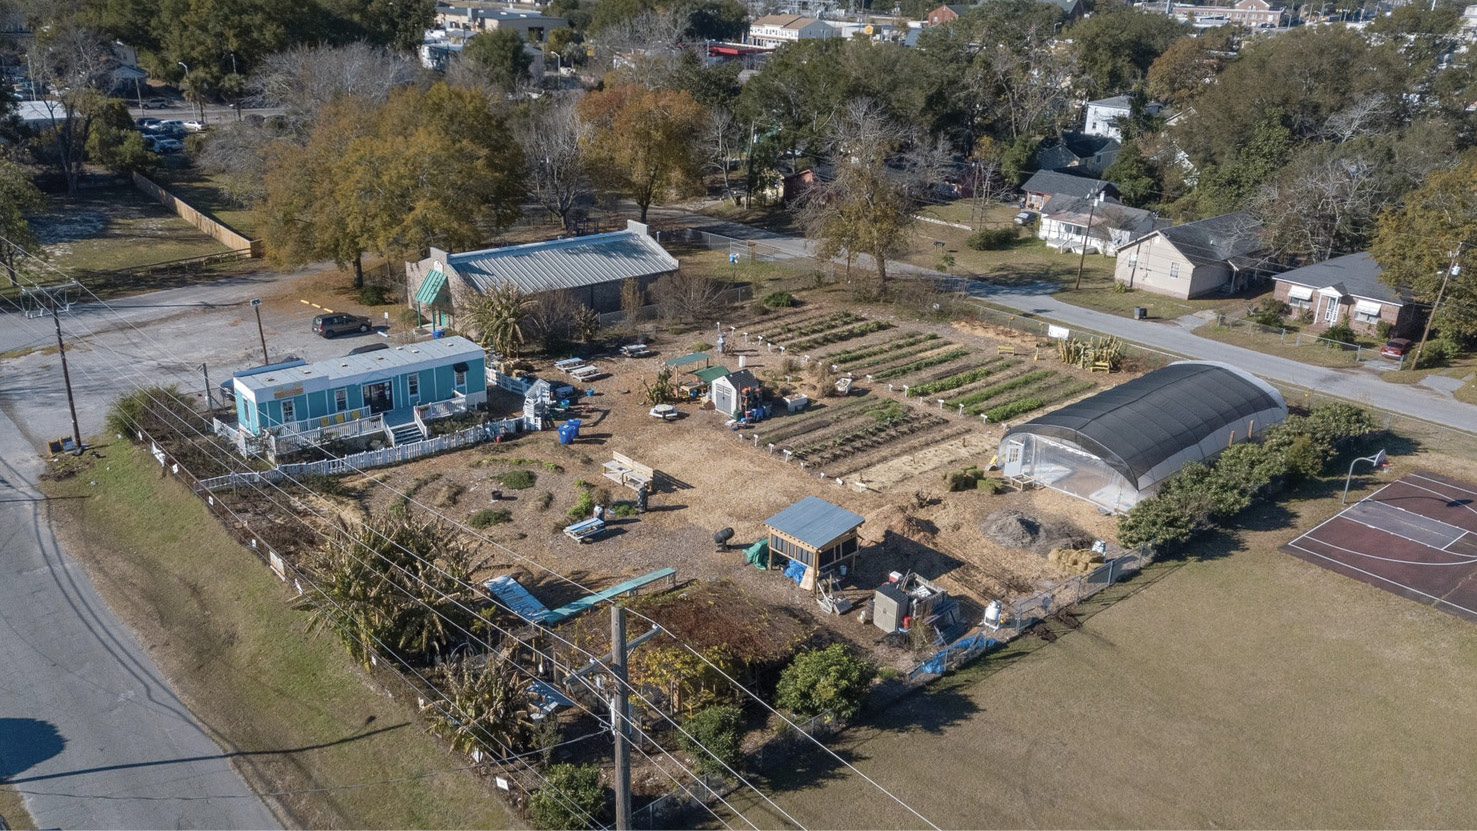 In the formerly vacant lot beside the old Chicora Elementary School, Jenkins and her team have created an urban oasis, where neighbors can buy freshly harvested vegetables and fruits and learn about growing and preparing nutritious food.